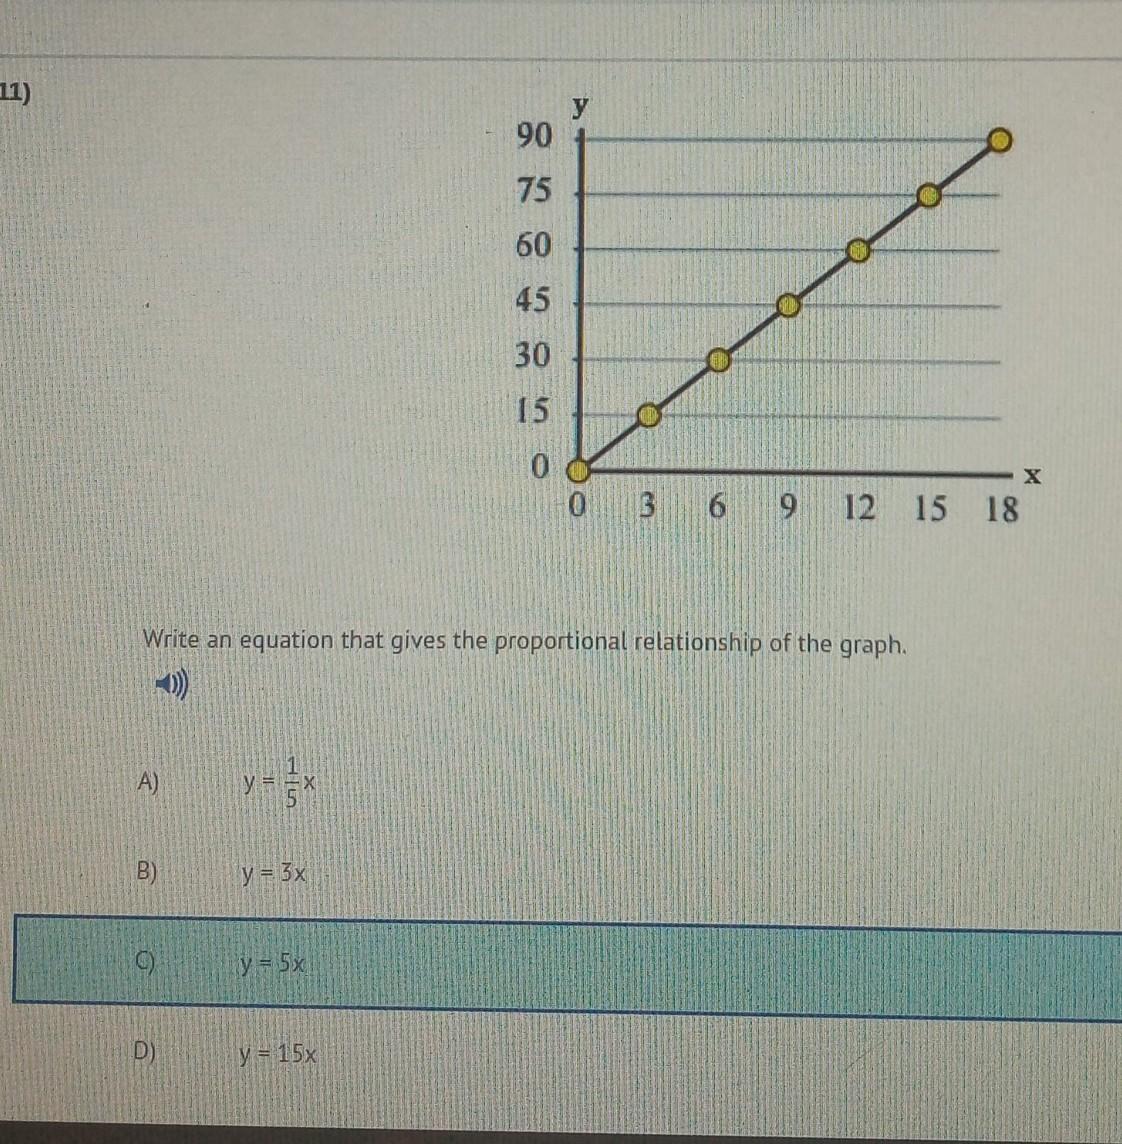 Write An Equation That Gives The Proportional Relationship Of The Graph